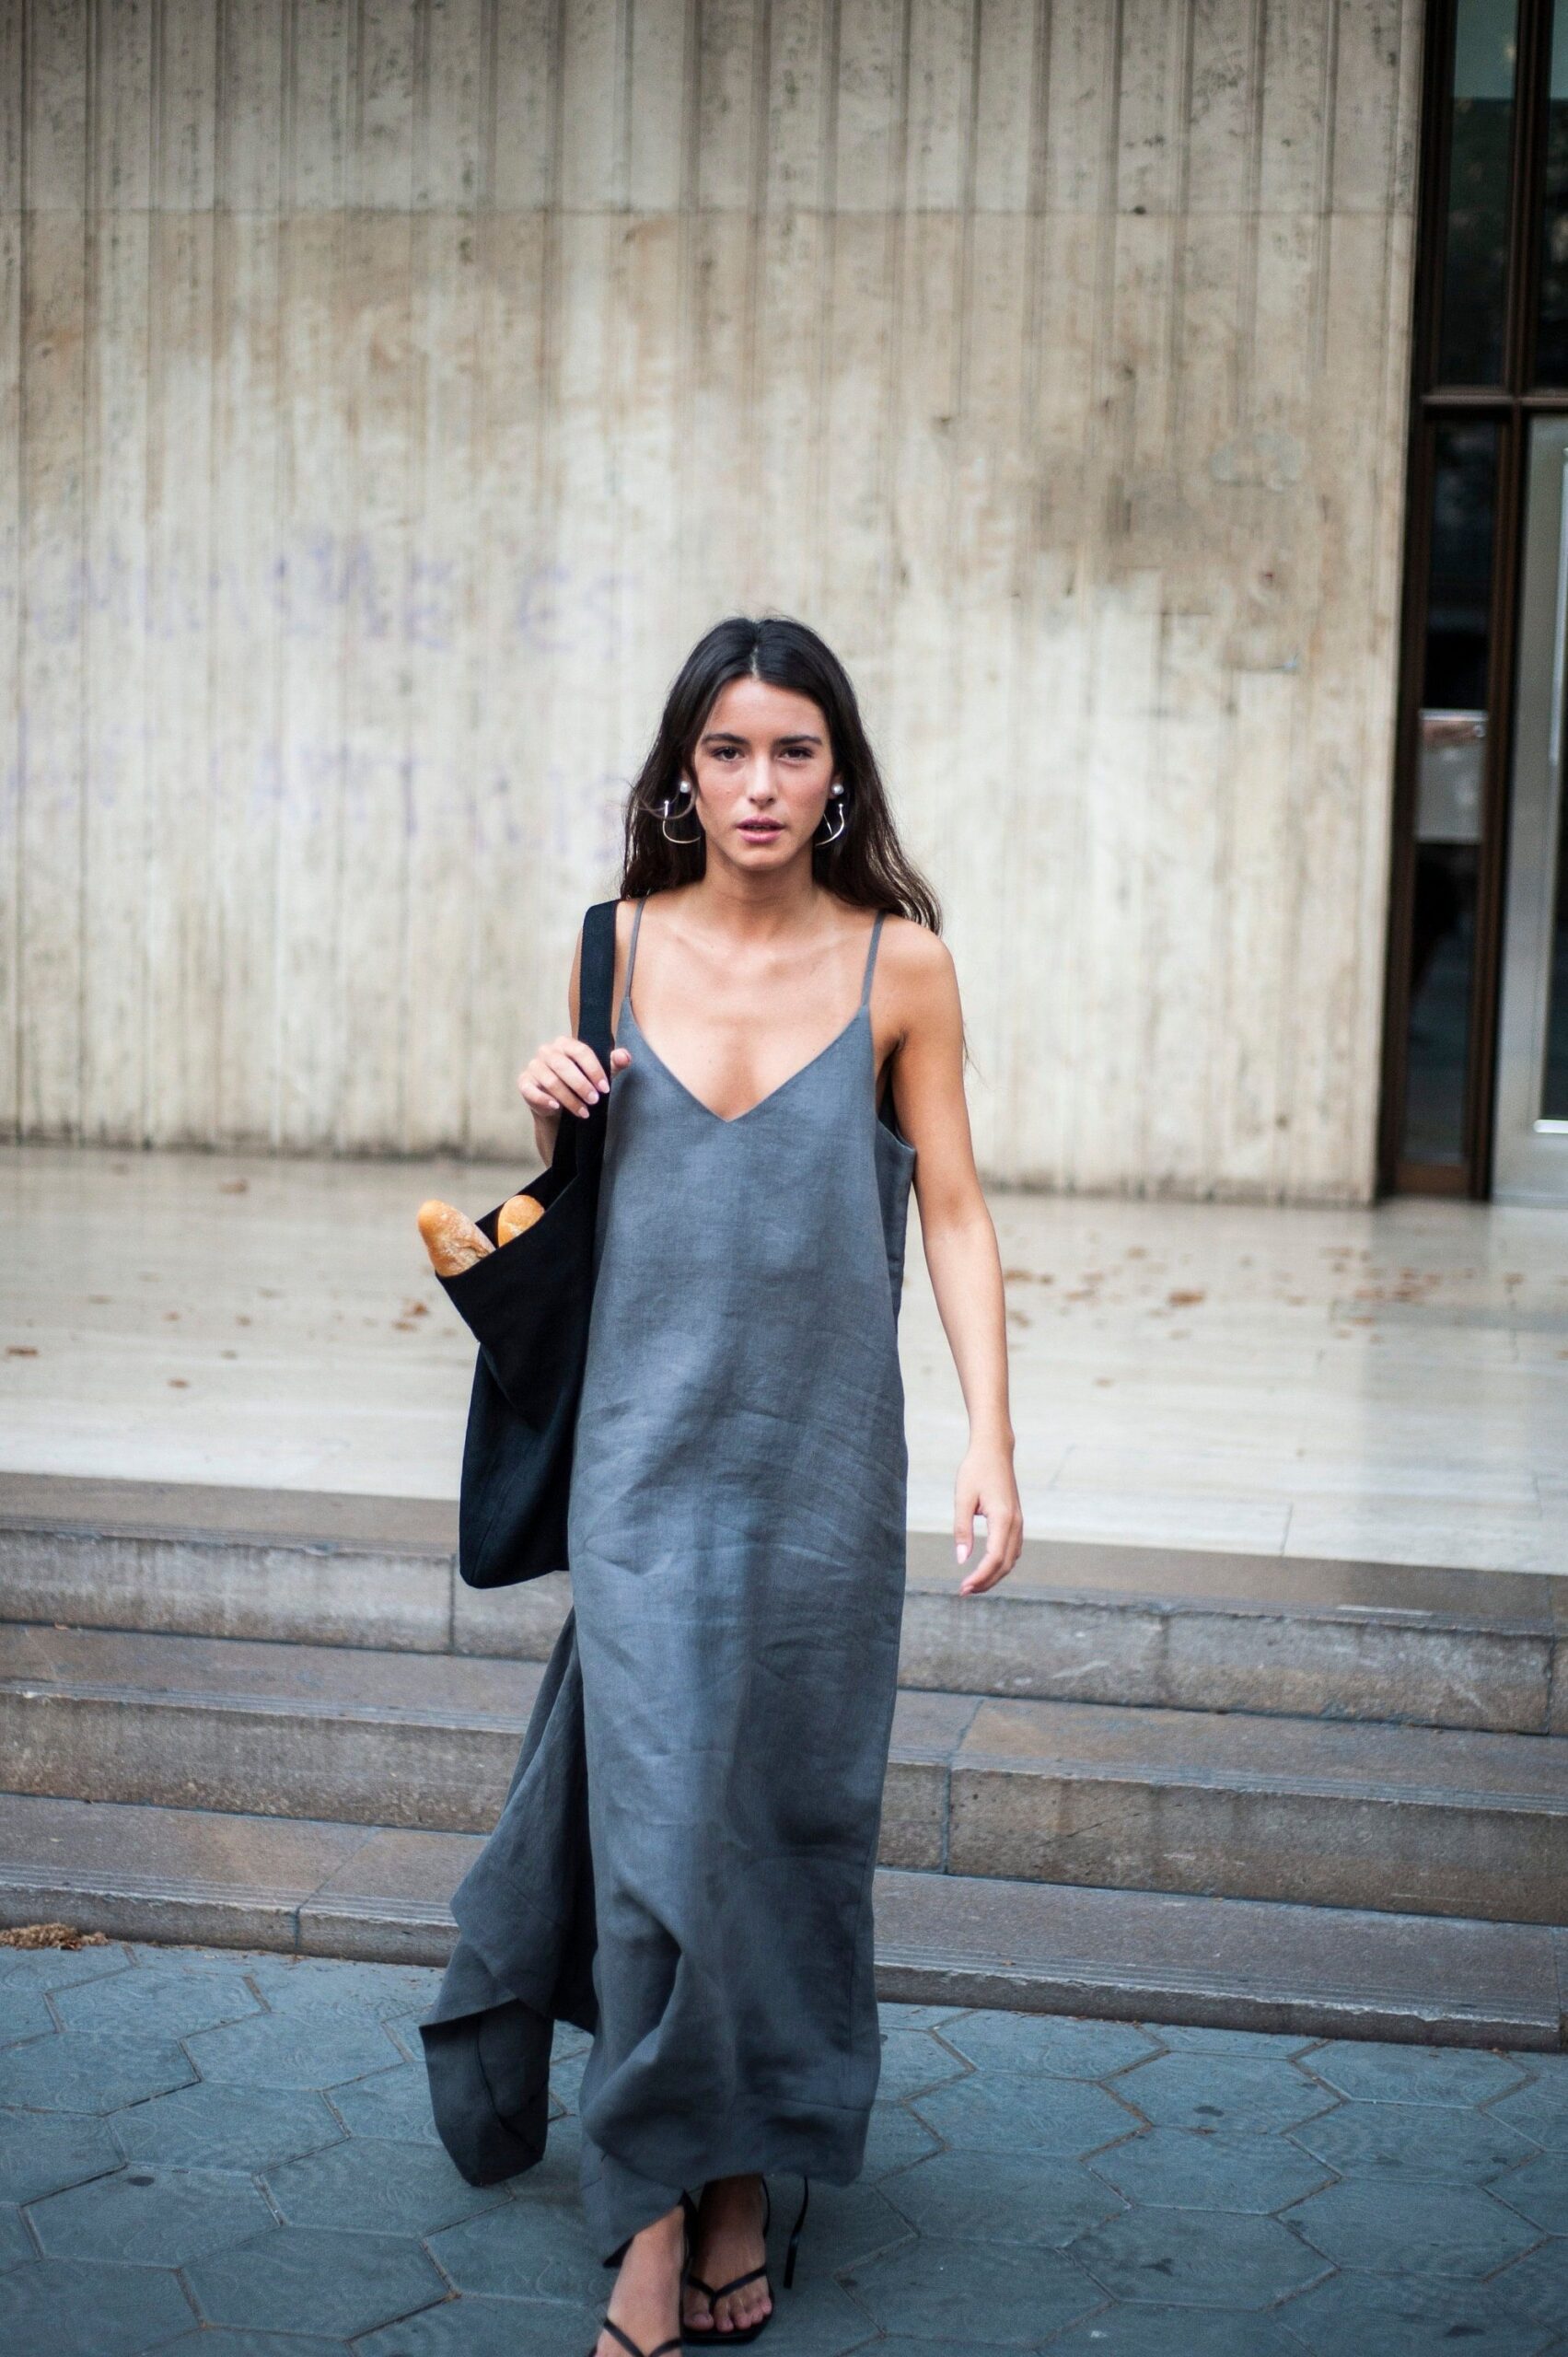 Styling Tips for the Perfect Slip Dress
Look